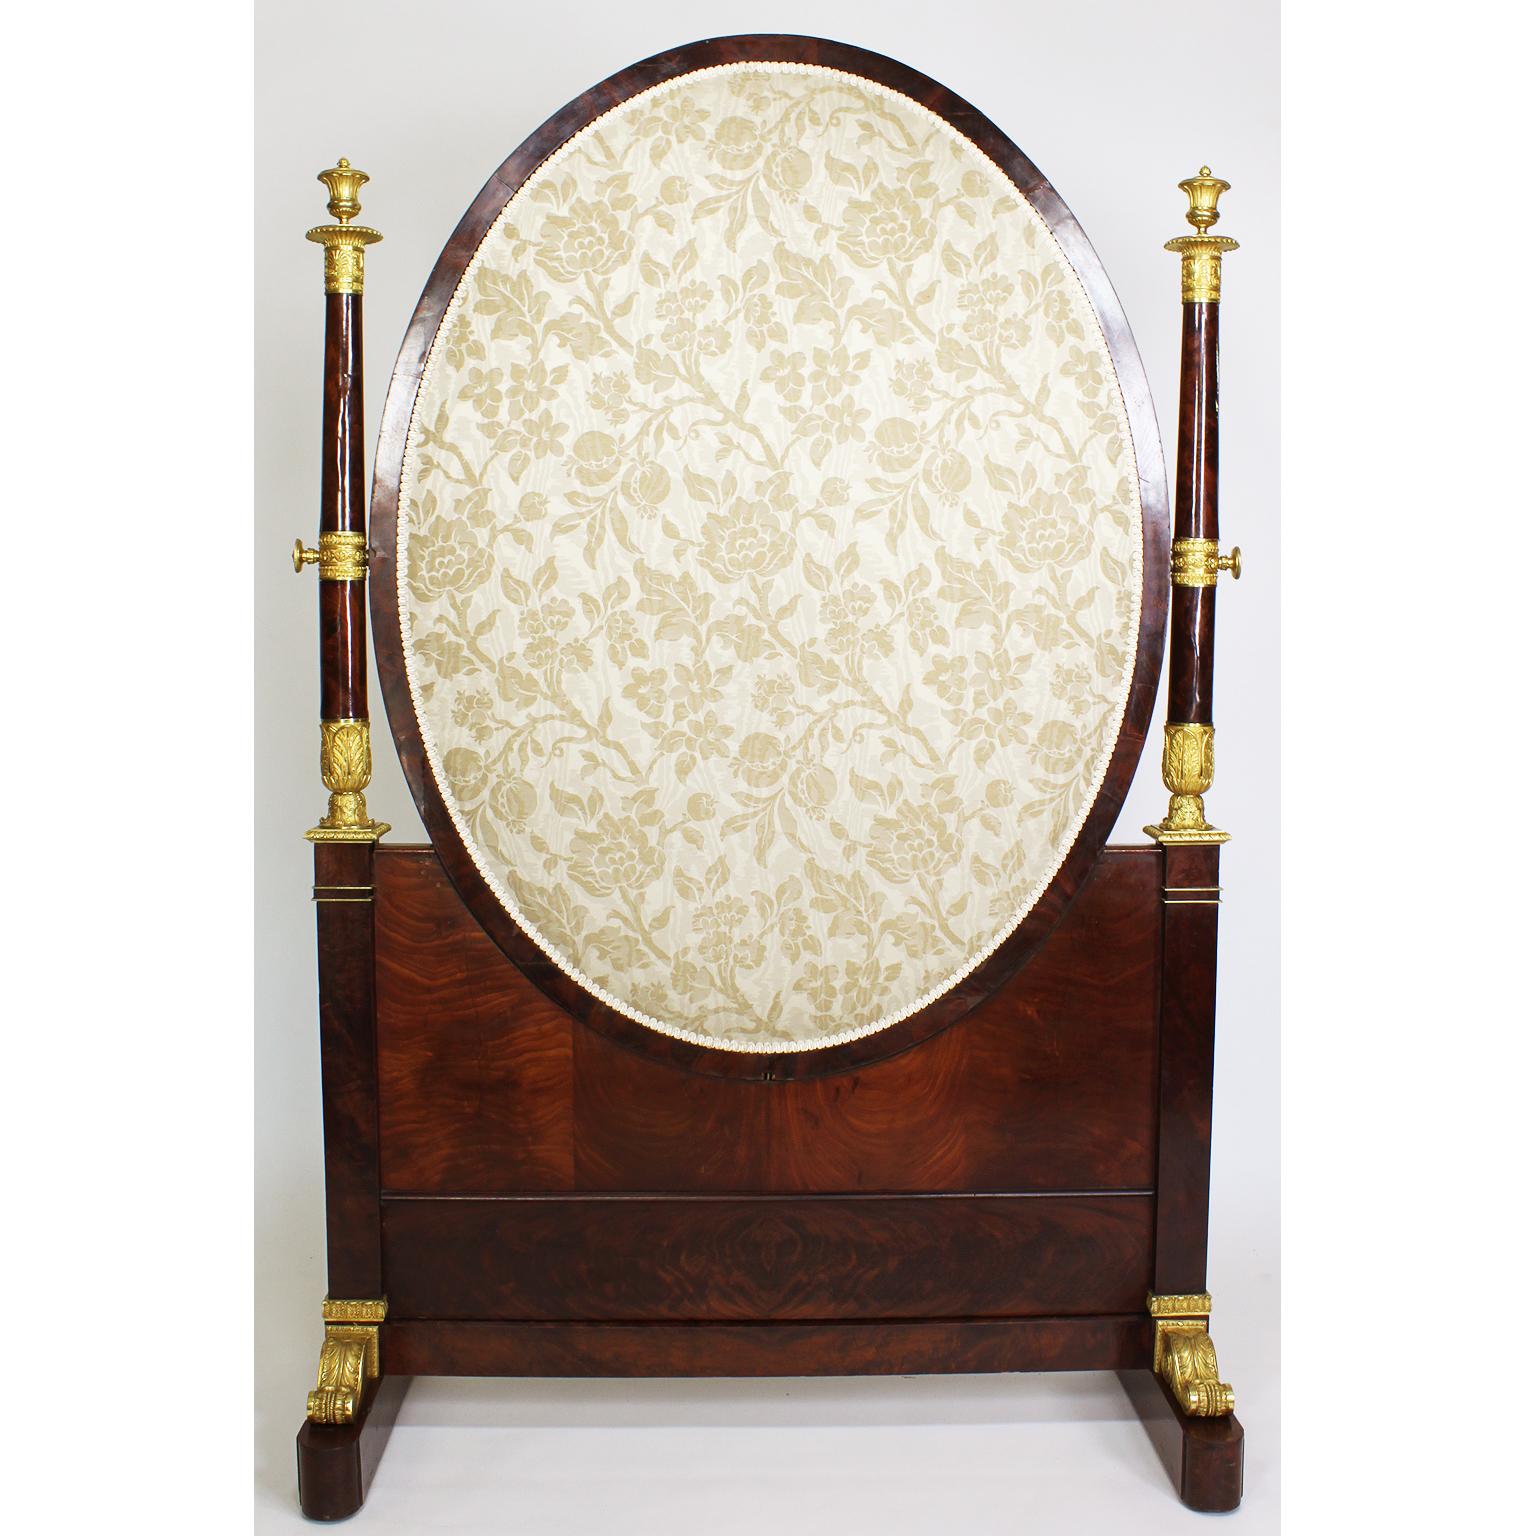 French Napoleon III Empire Style Mahogany and Ormolu Mounted Cheval Mirror For Sale 5